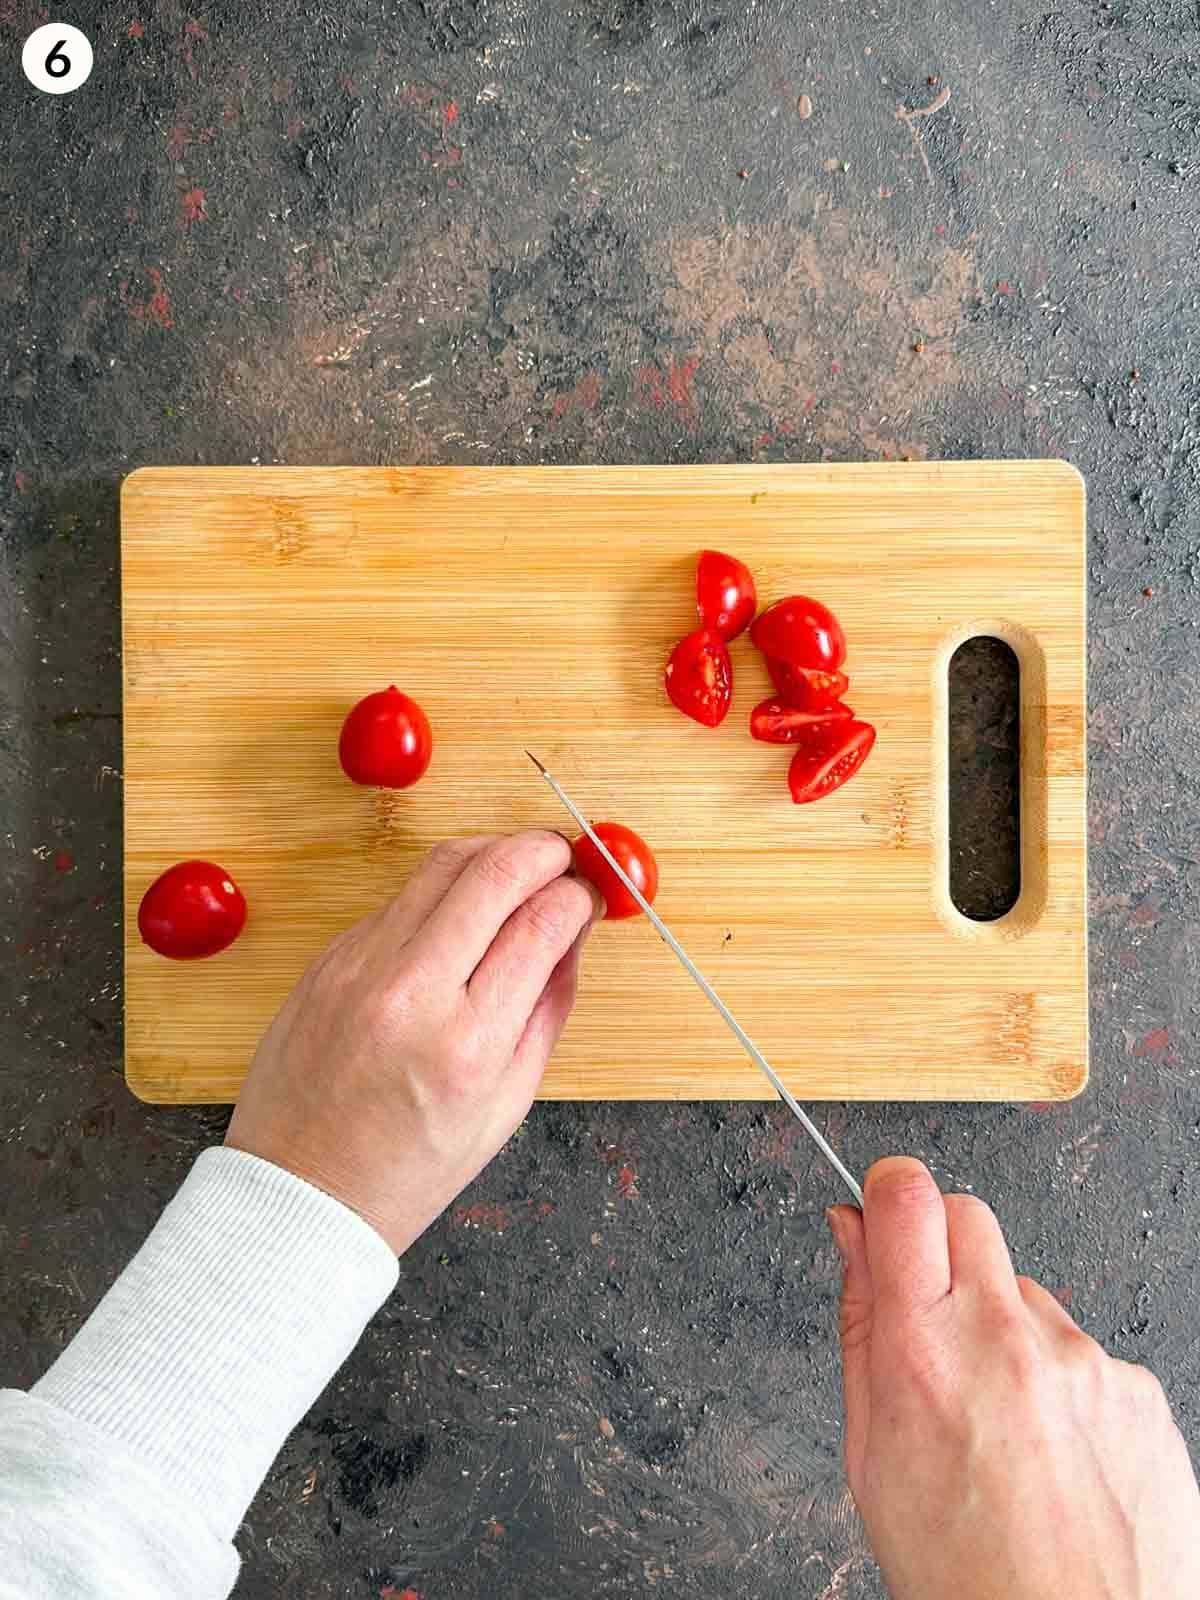 Chopping cherry tomatoes with a knife on a wooden chopping board